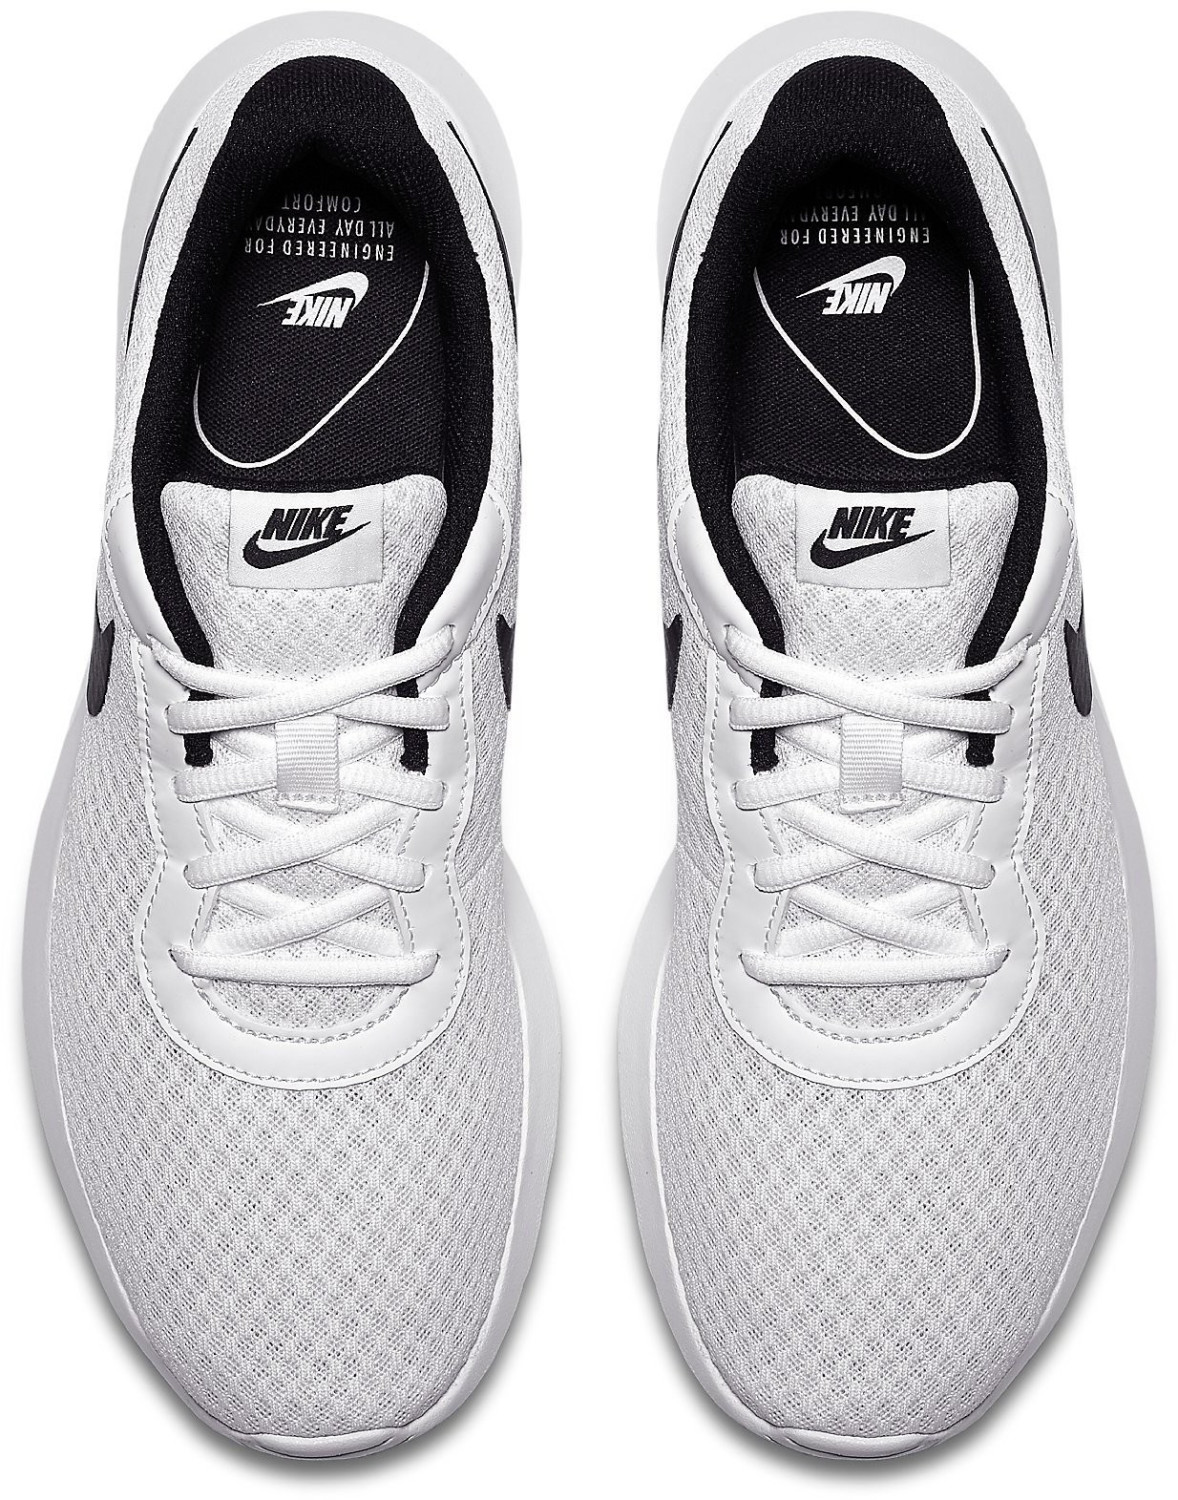 Buy Nike Tanjun White/Black from £52.79 (Today) – Best Deals on idealo ...